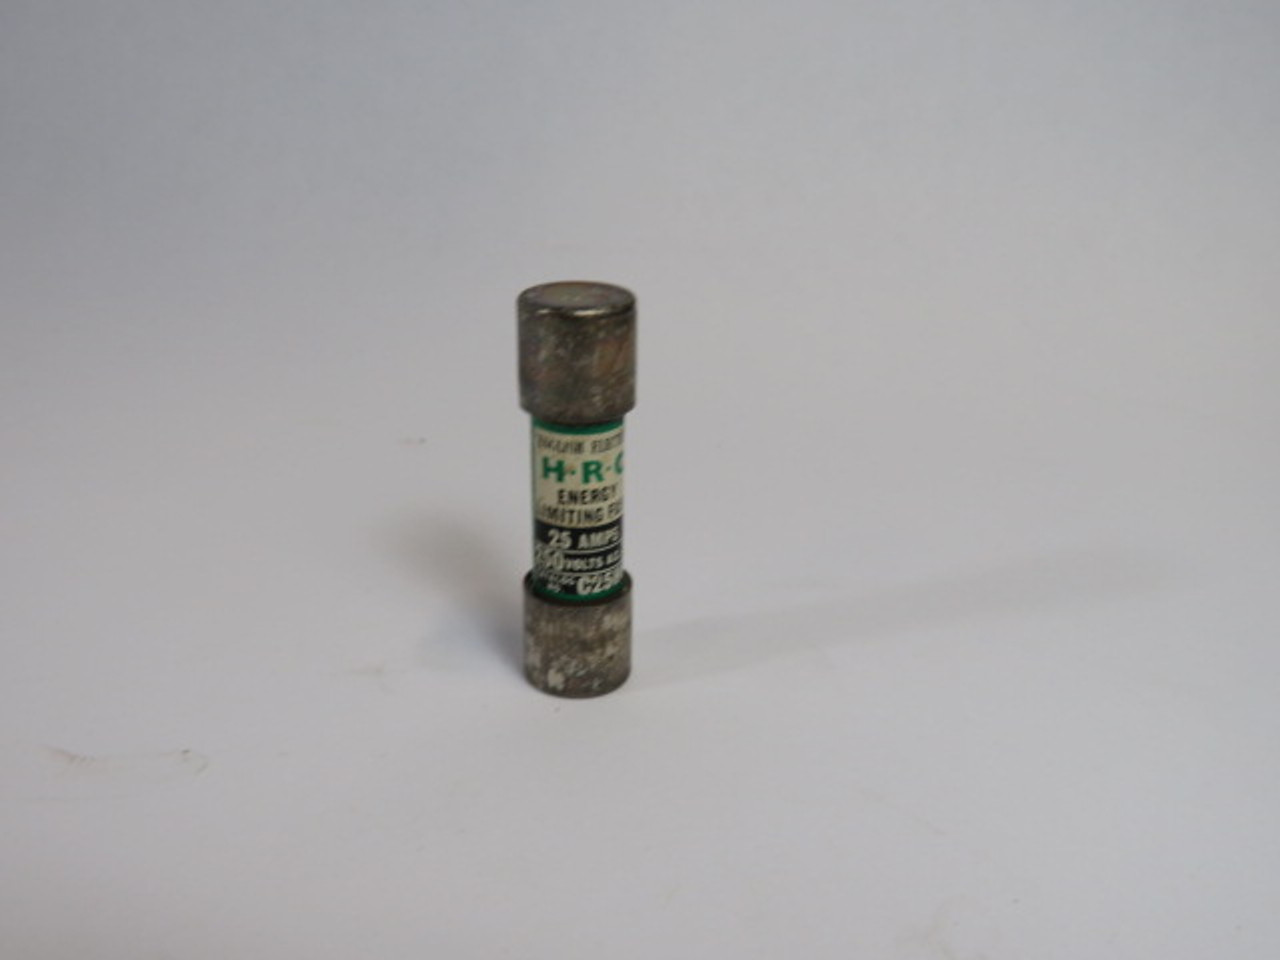 English Electric C25HG HRC Fuse 2A 250VAC Lot of 10 USED